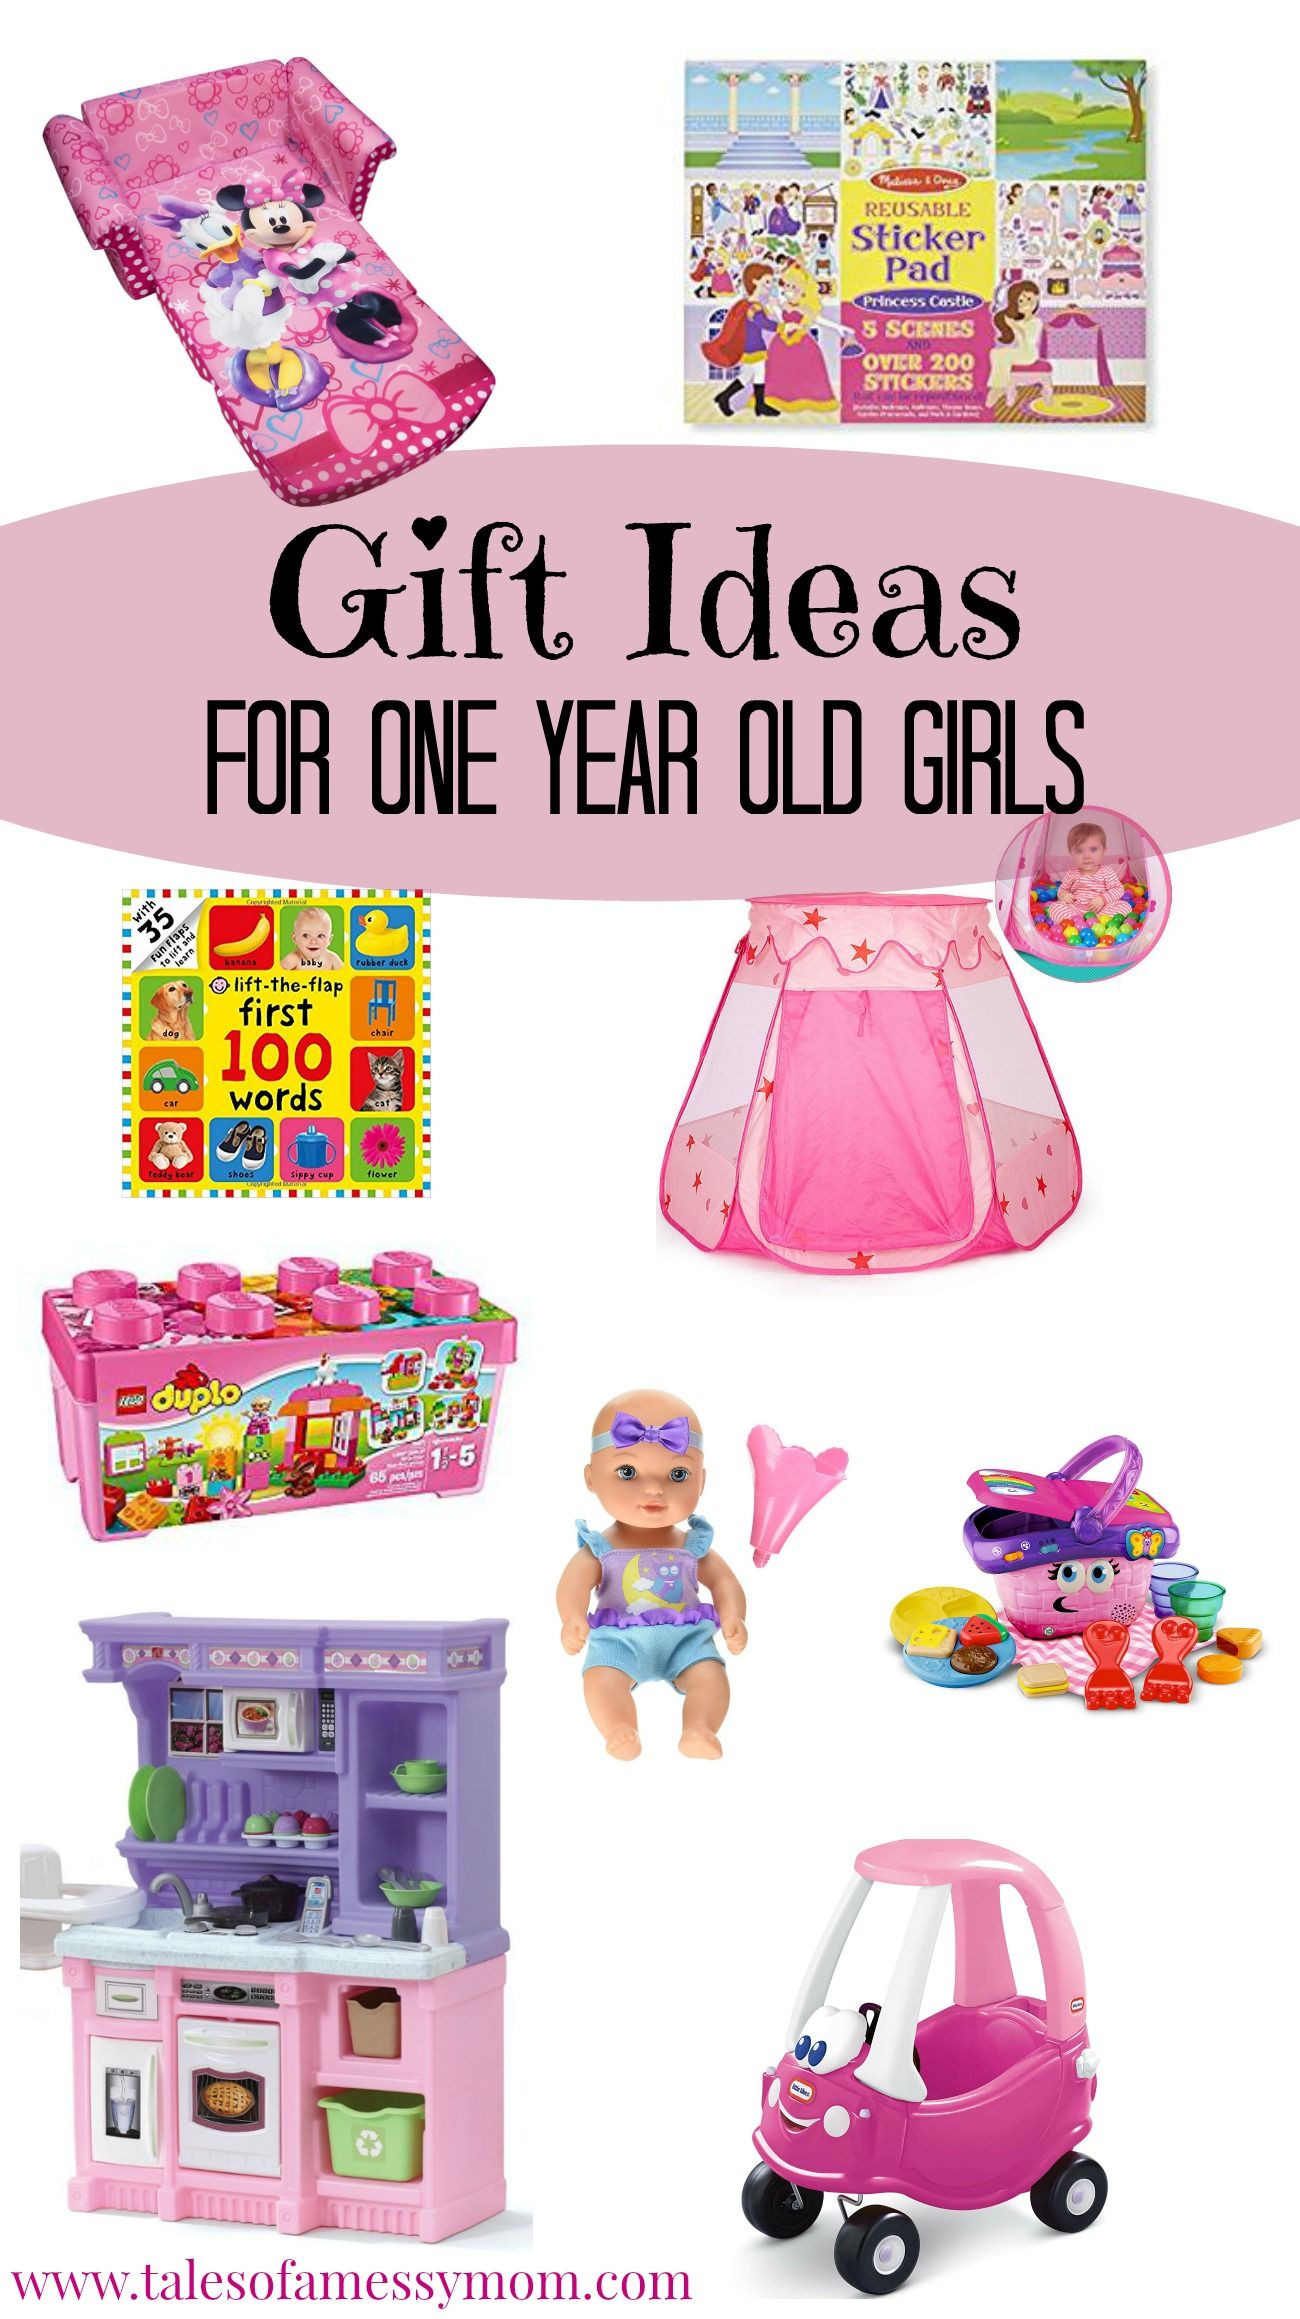 Birthday Gift Ideas For 1 Year Old Girl
 Gift Ideas for e Year Old Girls